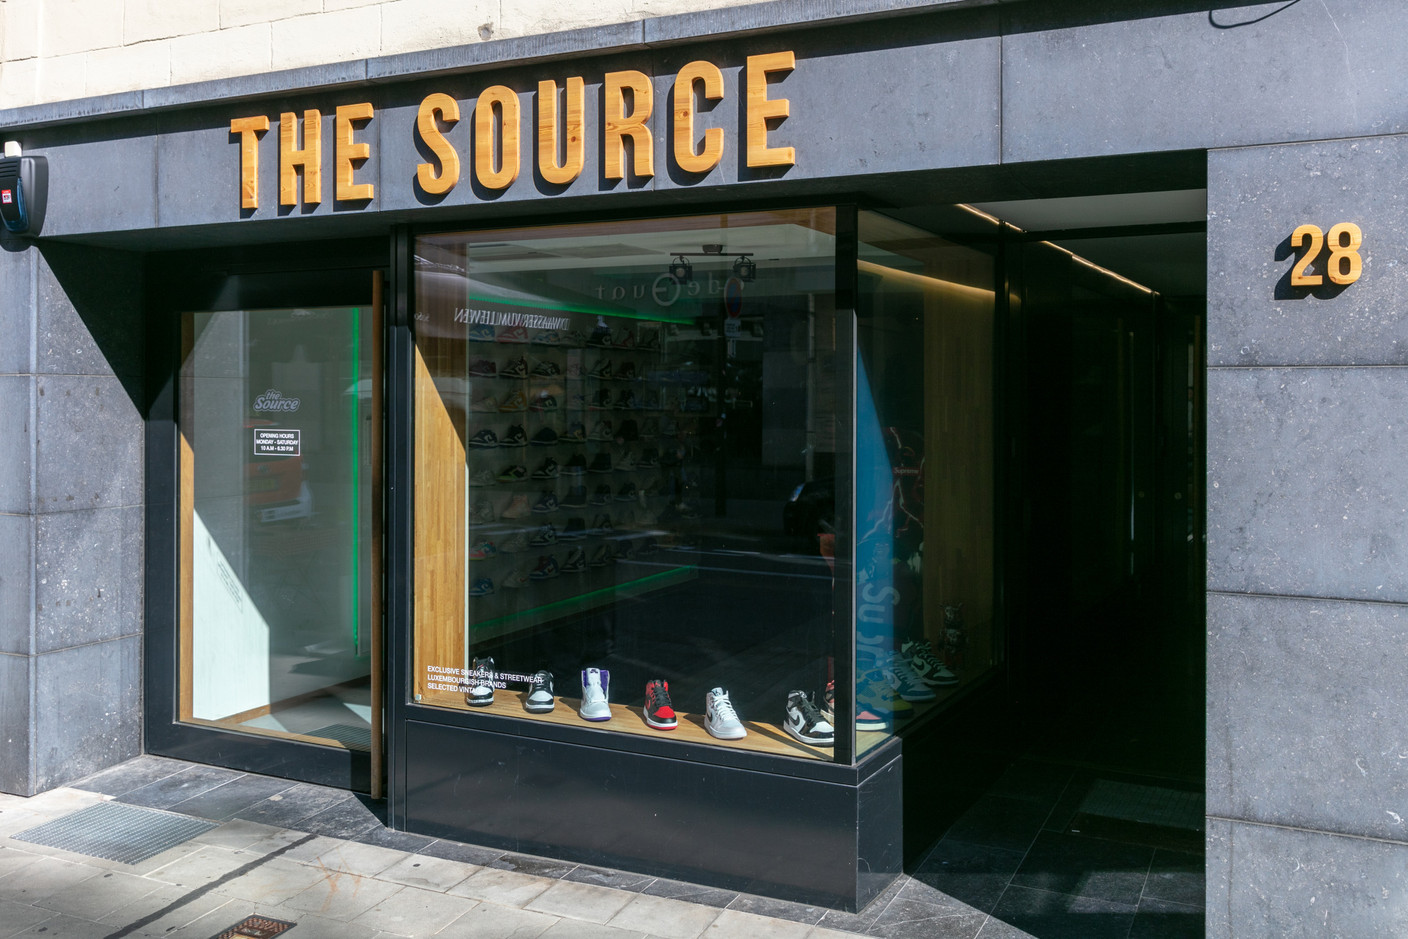 The Source is located at 28, rue Notre-Dame, in Luxembourg City. (Photo: Romain Gamba/Maison Moderne)